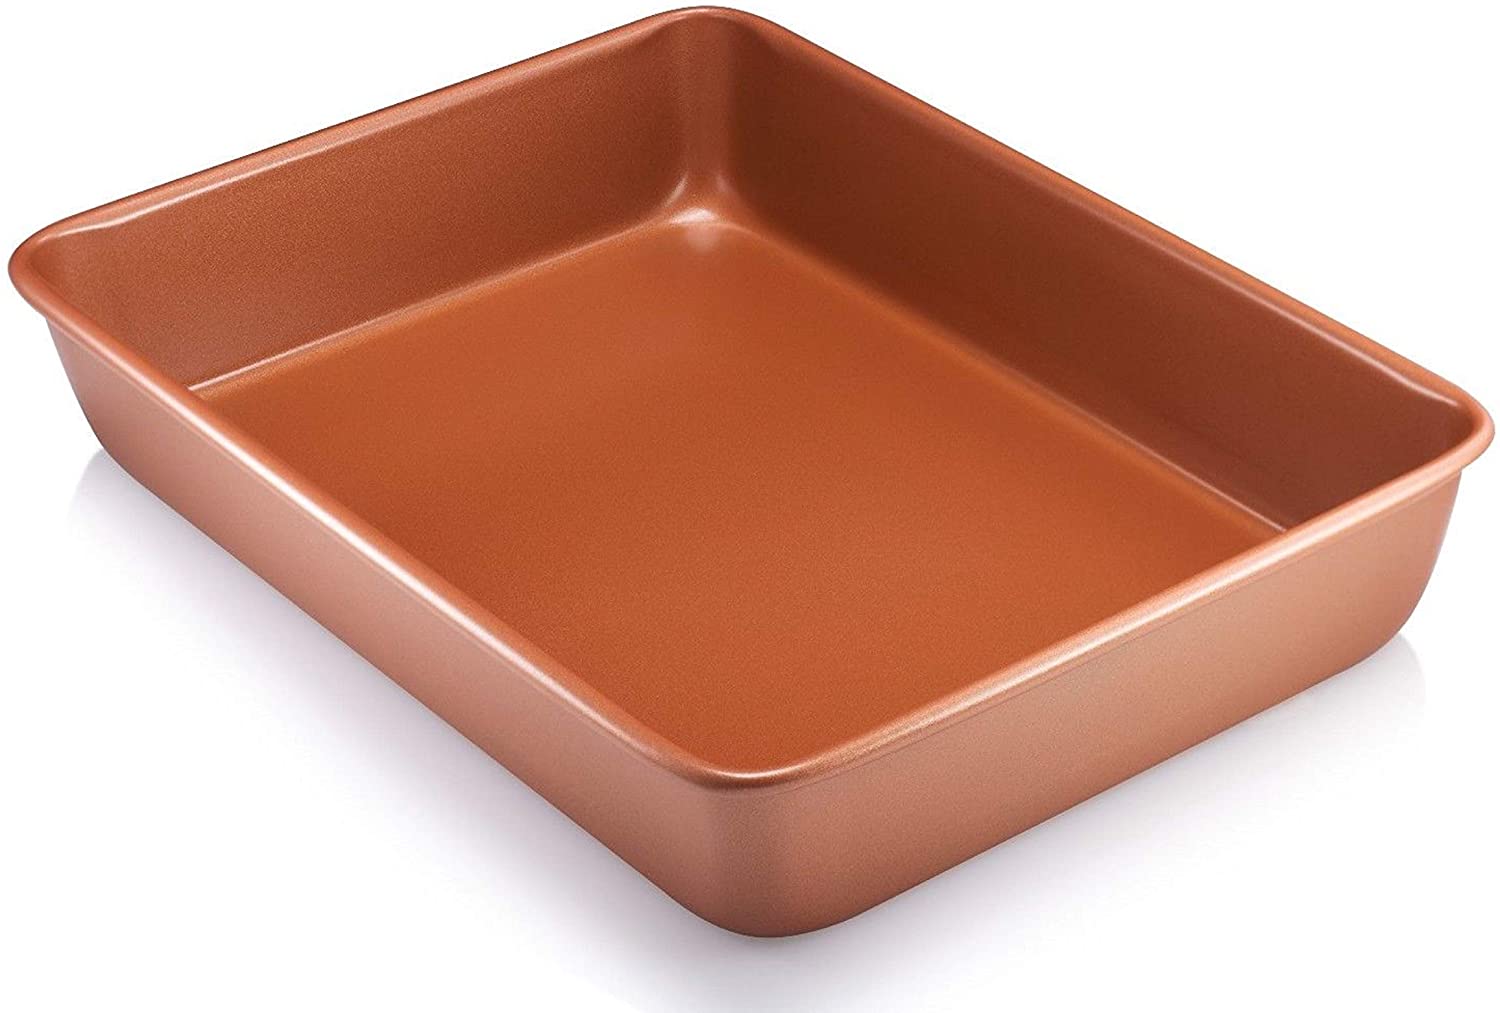 Rectangle Nonstick Bakeware 9-Inch-by-13-Inch Baking Pan with Quick Release Coating, Brown
